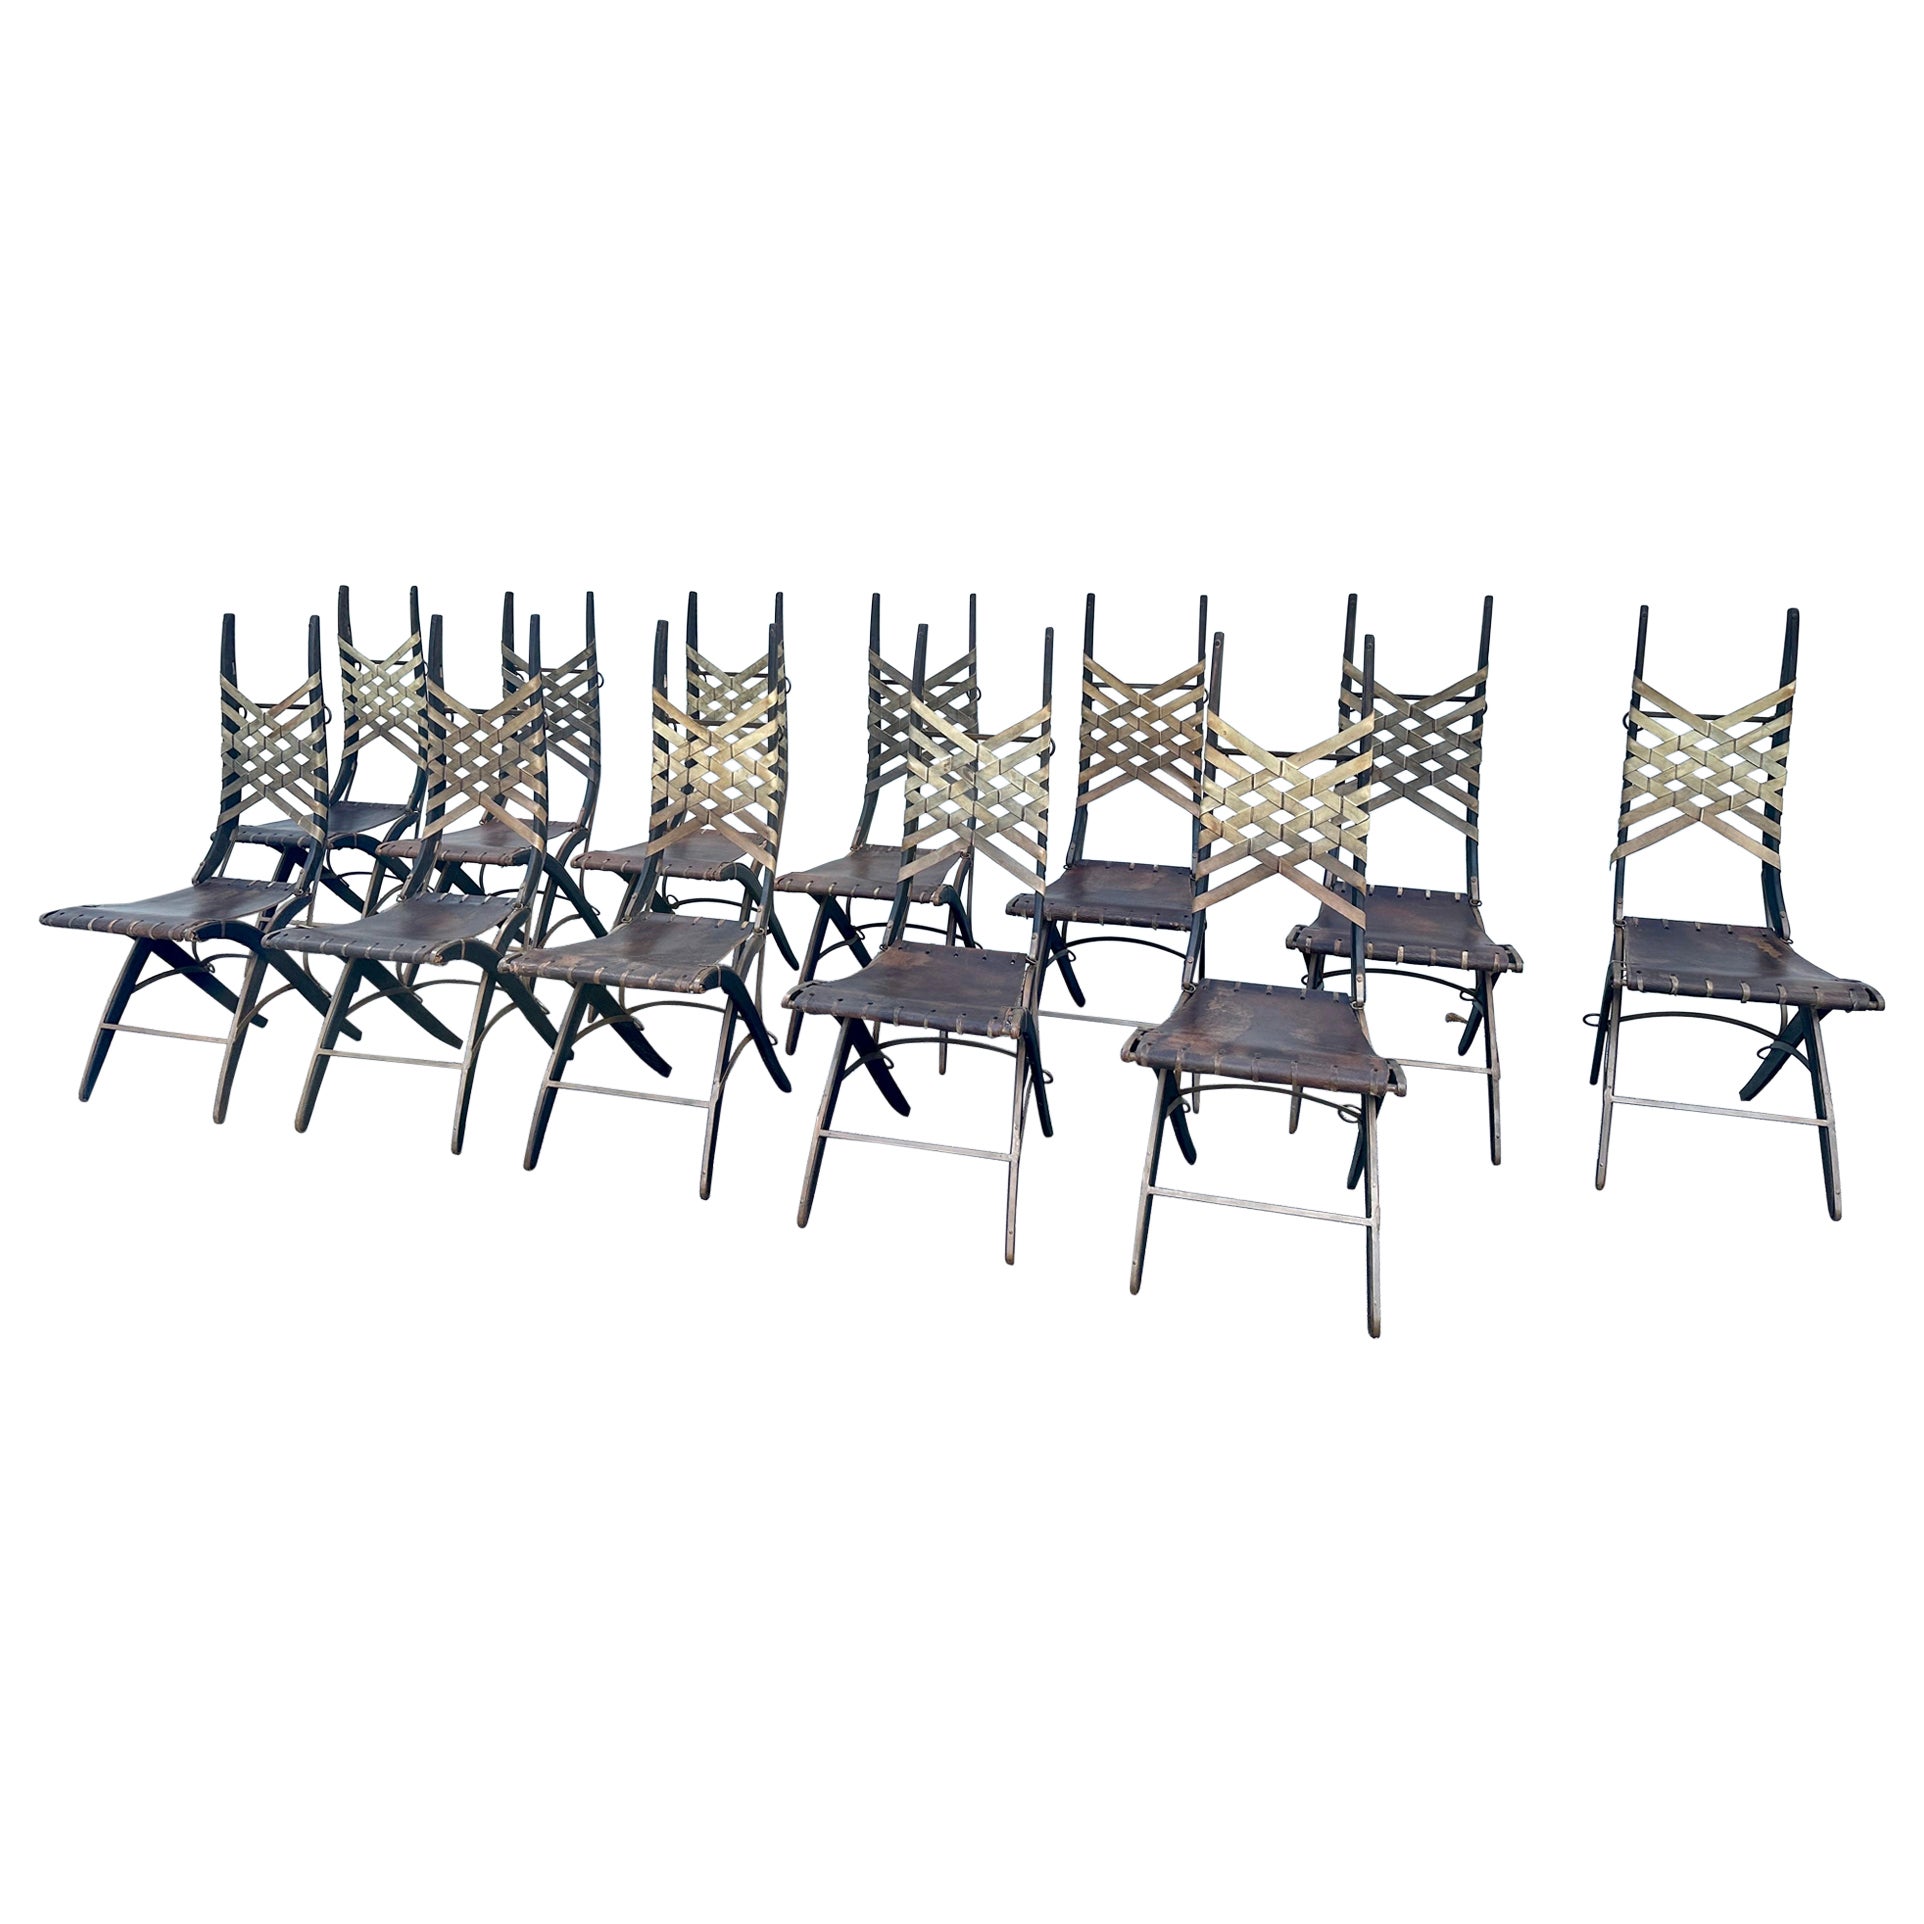 Alberto Marconetti Original Oak, Iron & Leather Straps Dining Chairs, Set of 12 For Sale